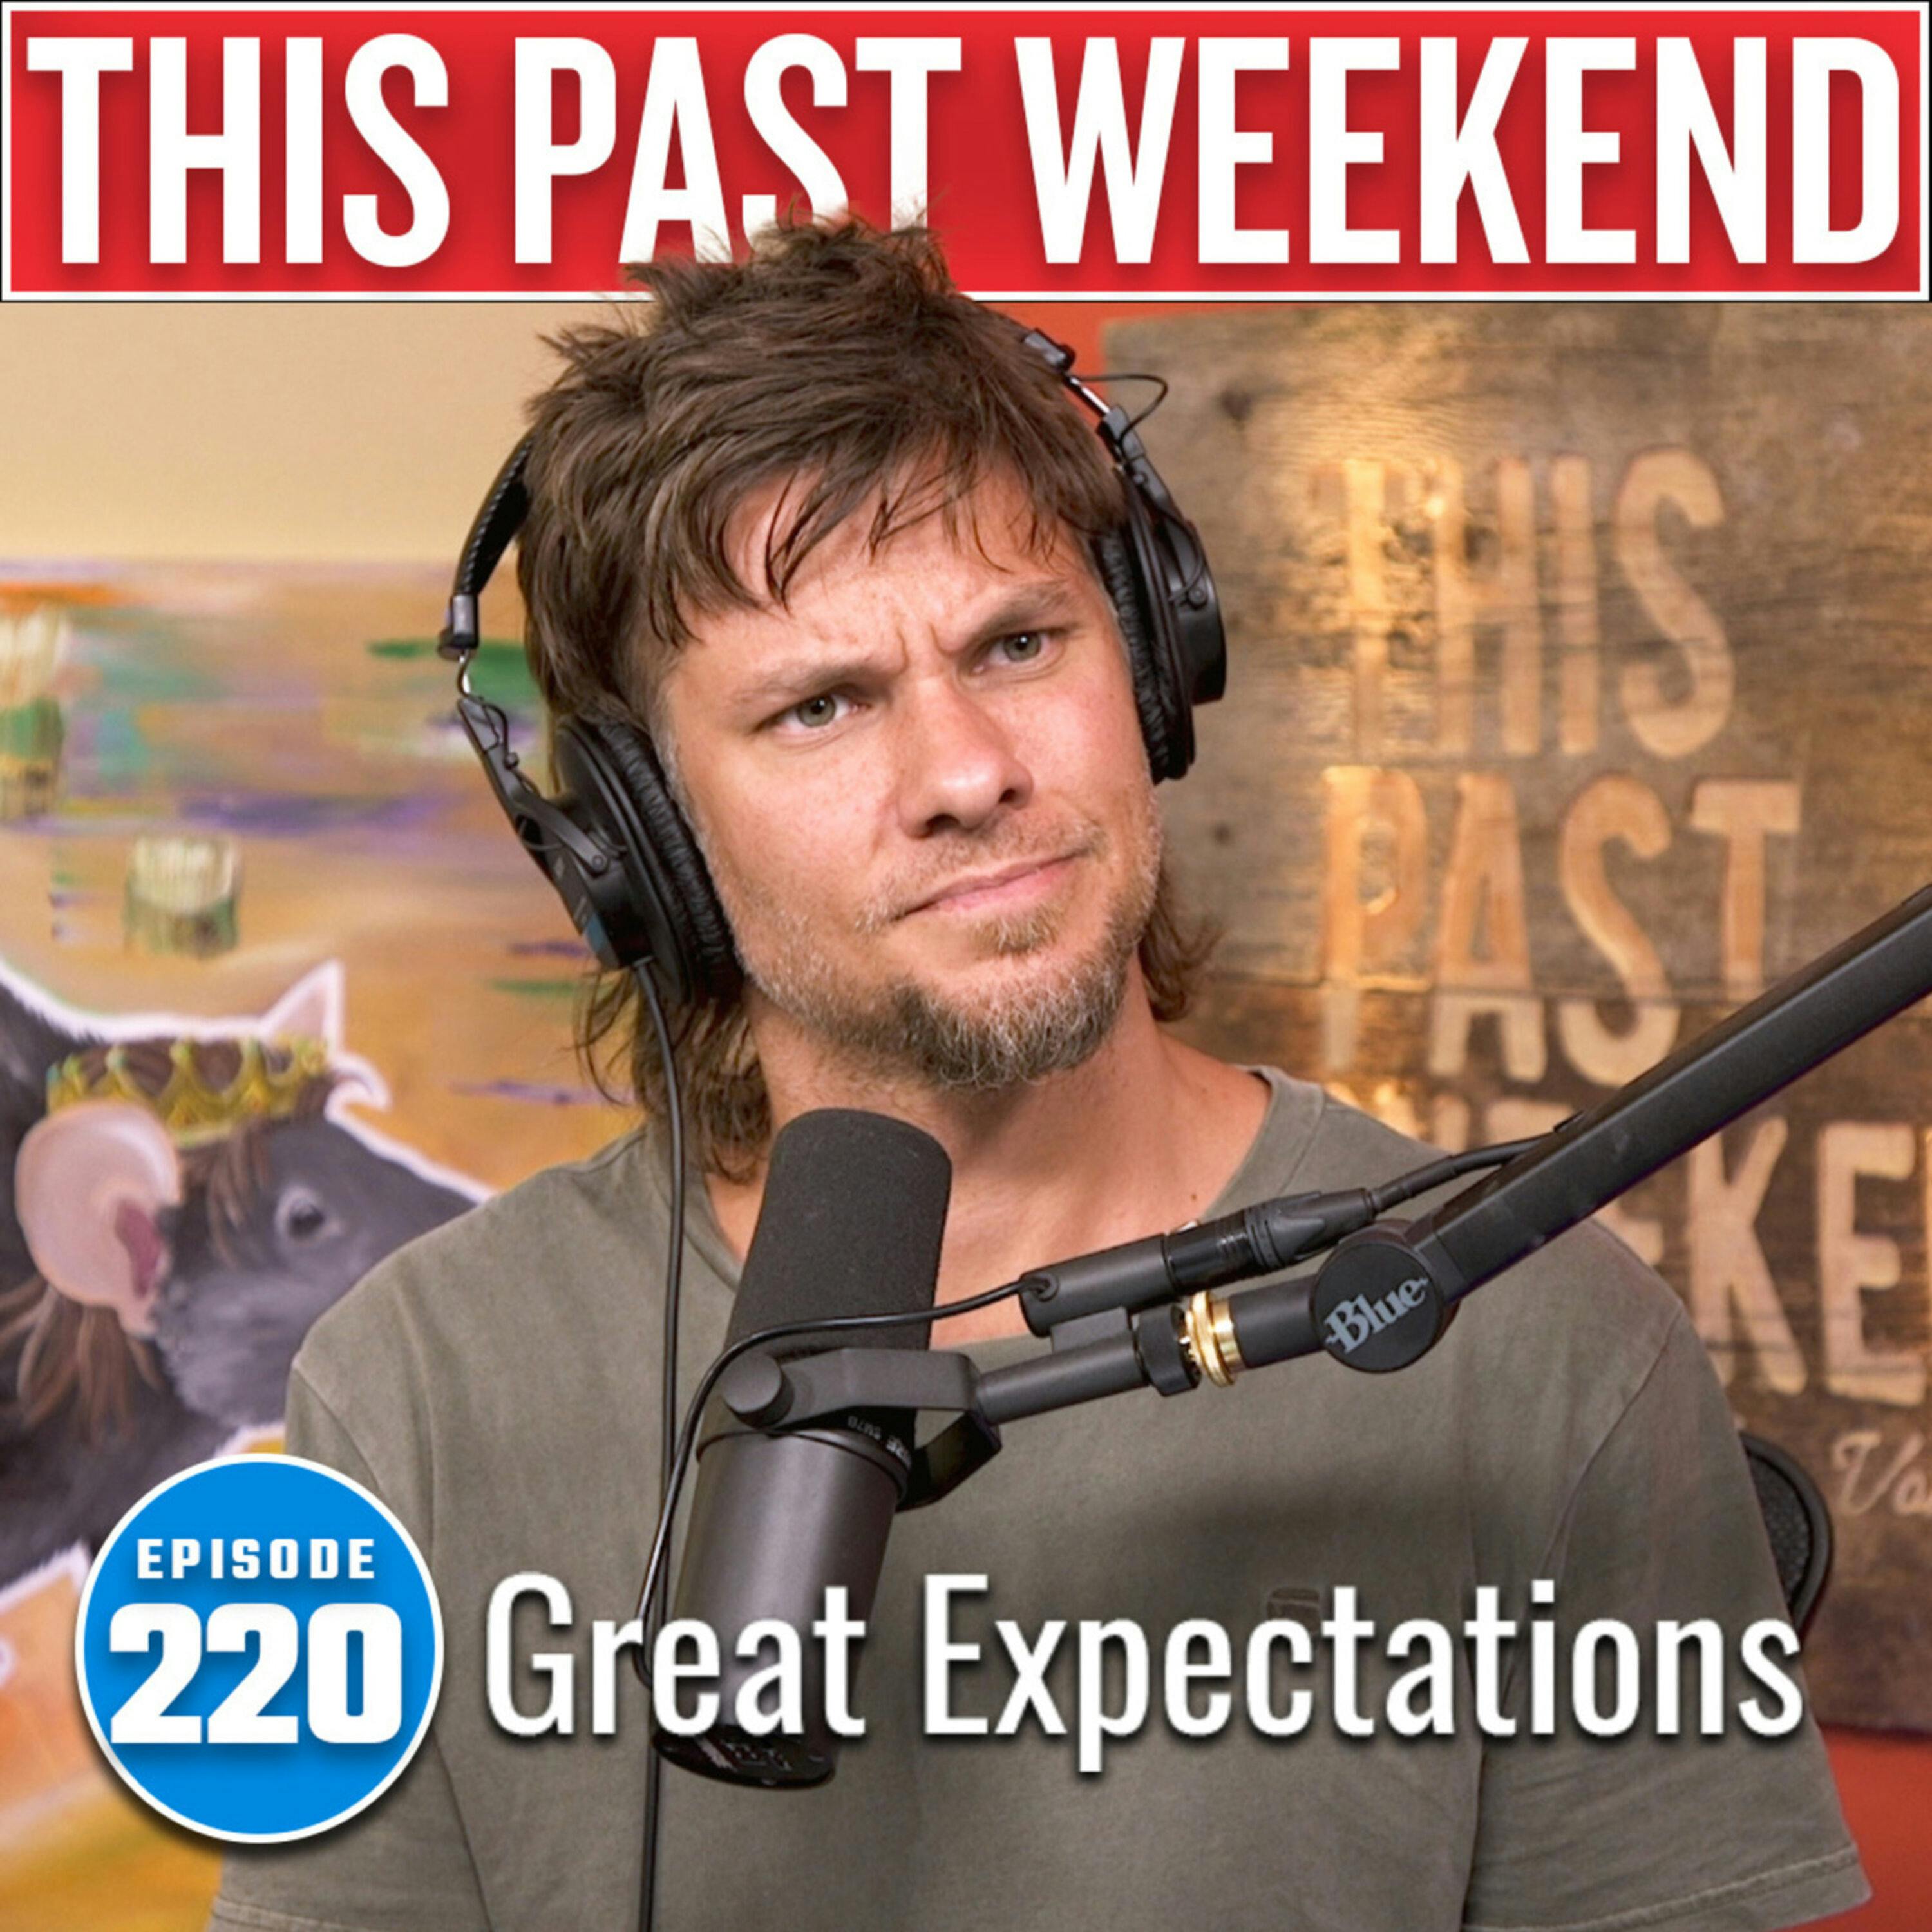 Great Expectations | This Past Weekend #220